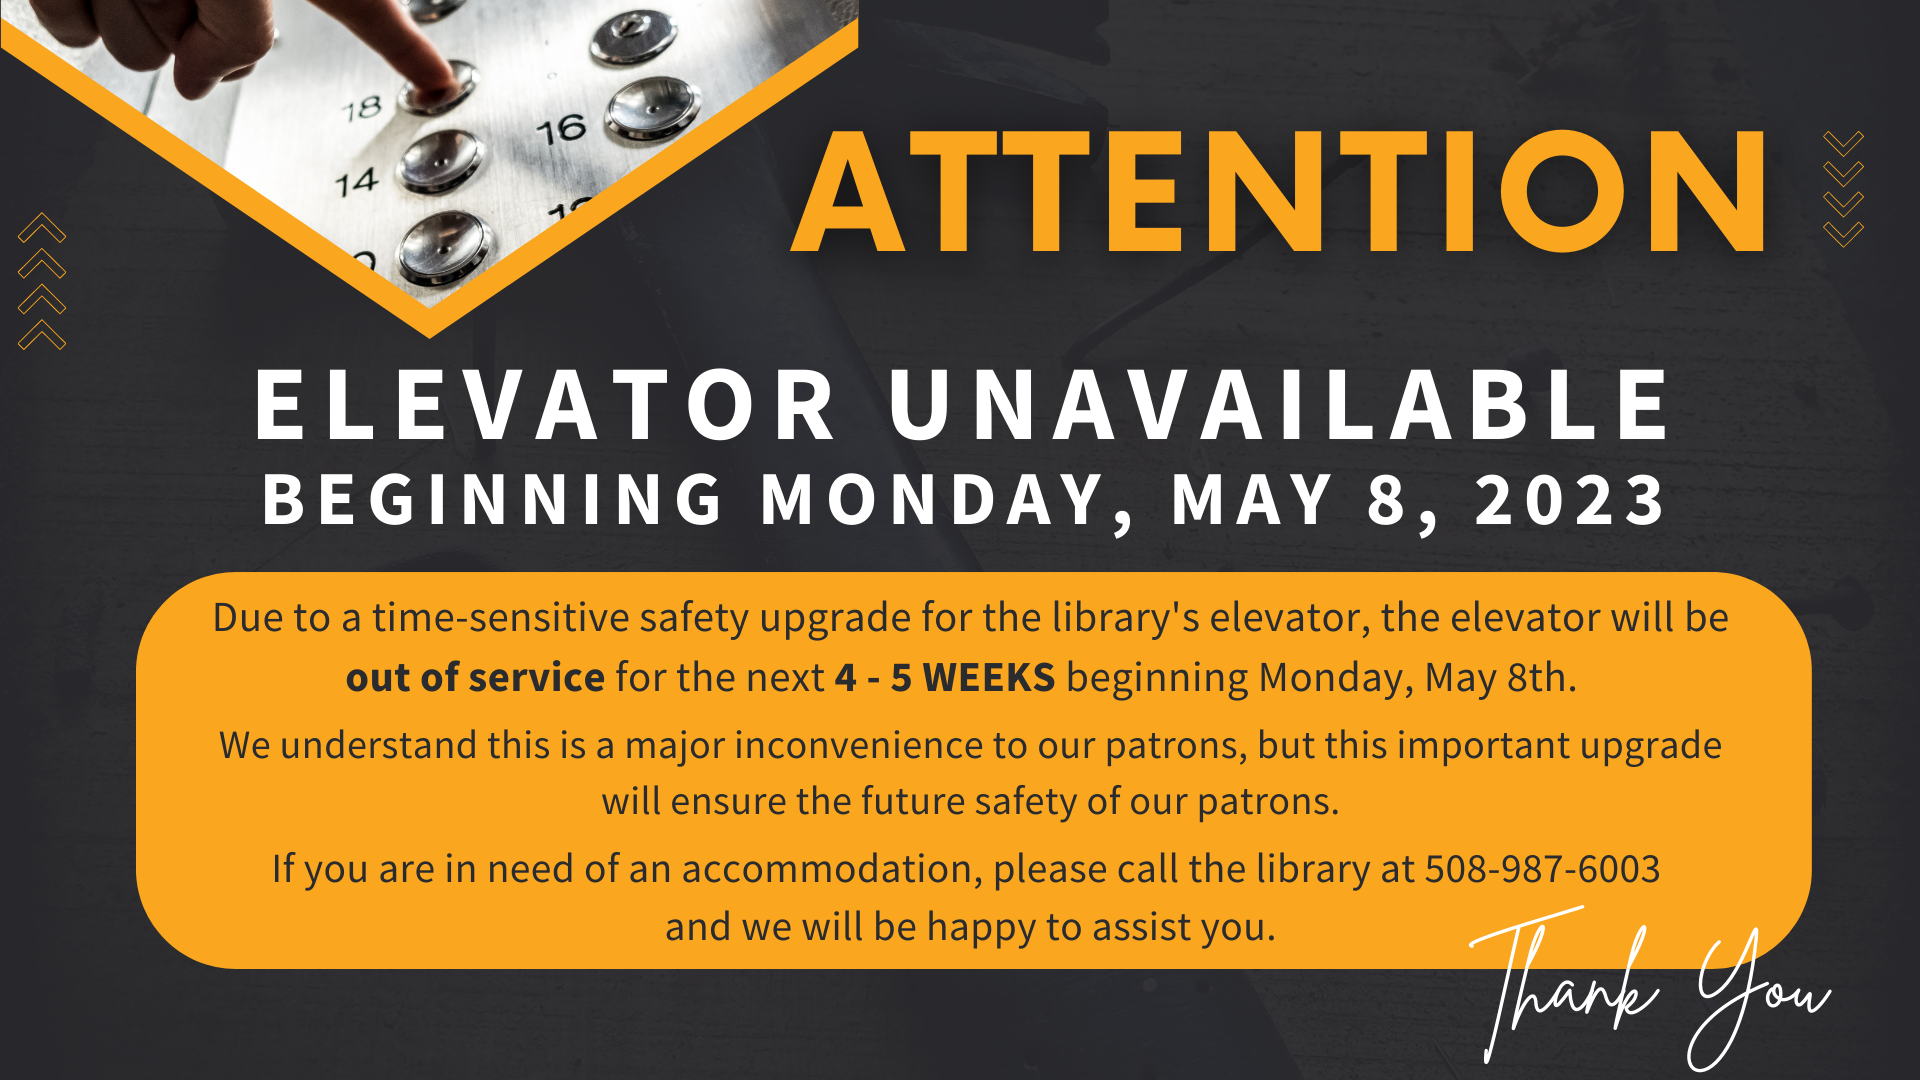 ELEVATOR UNAVAILABLE BEGINNING MONDAY, MAY 8, 2023: Due to a time-sensitive safety upgrade for the library's elevator, the elevator will be out of service for the next  4 - 5 WEEKS beginning Monday, May 8th.    We understand this is a major inconvenience to our patrons, but this important upgrade will ensure the future safety of our patrons.  If you are in need of an accommodation,  please call the library at 508-987-6003 and  we will be happy to assist you.